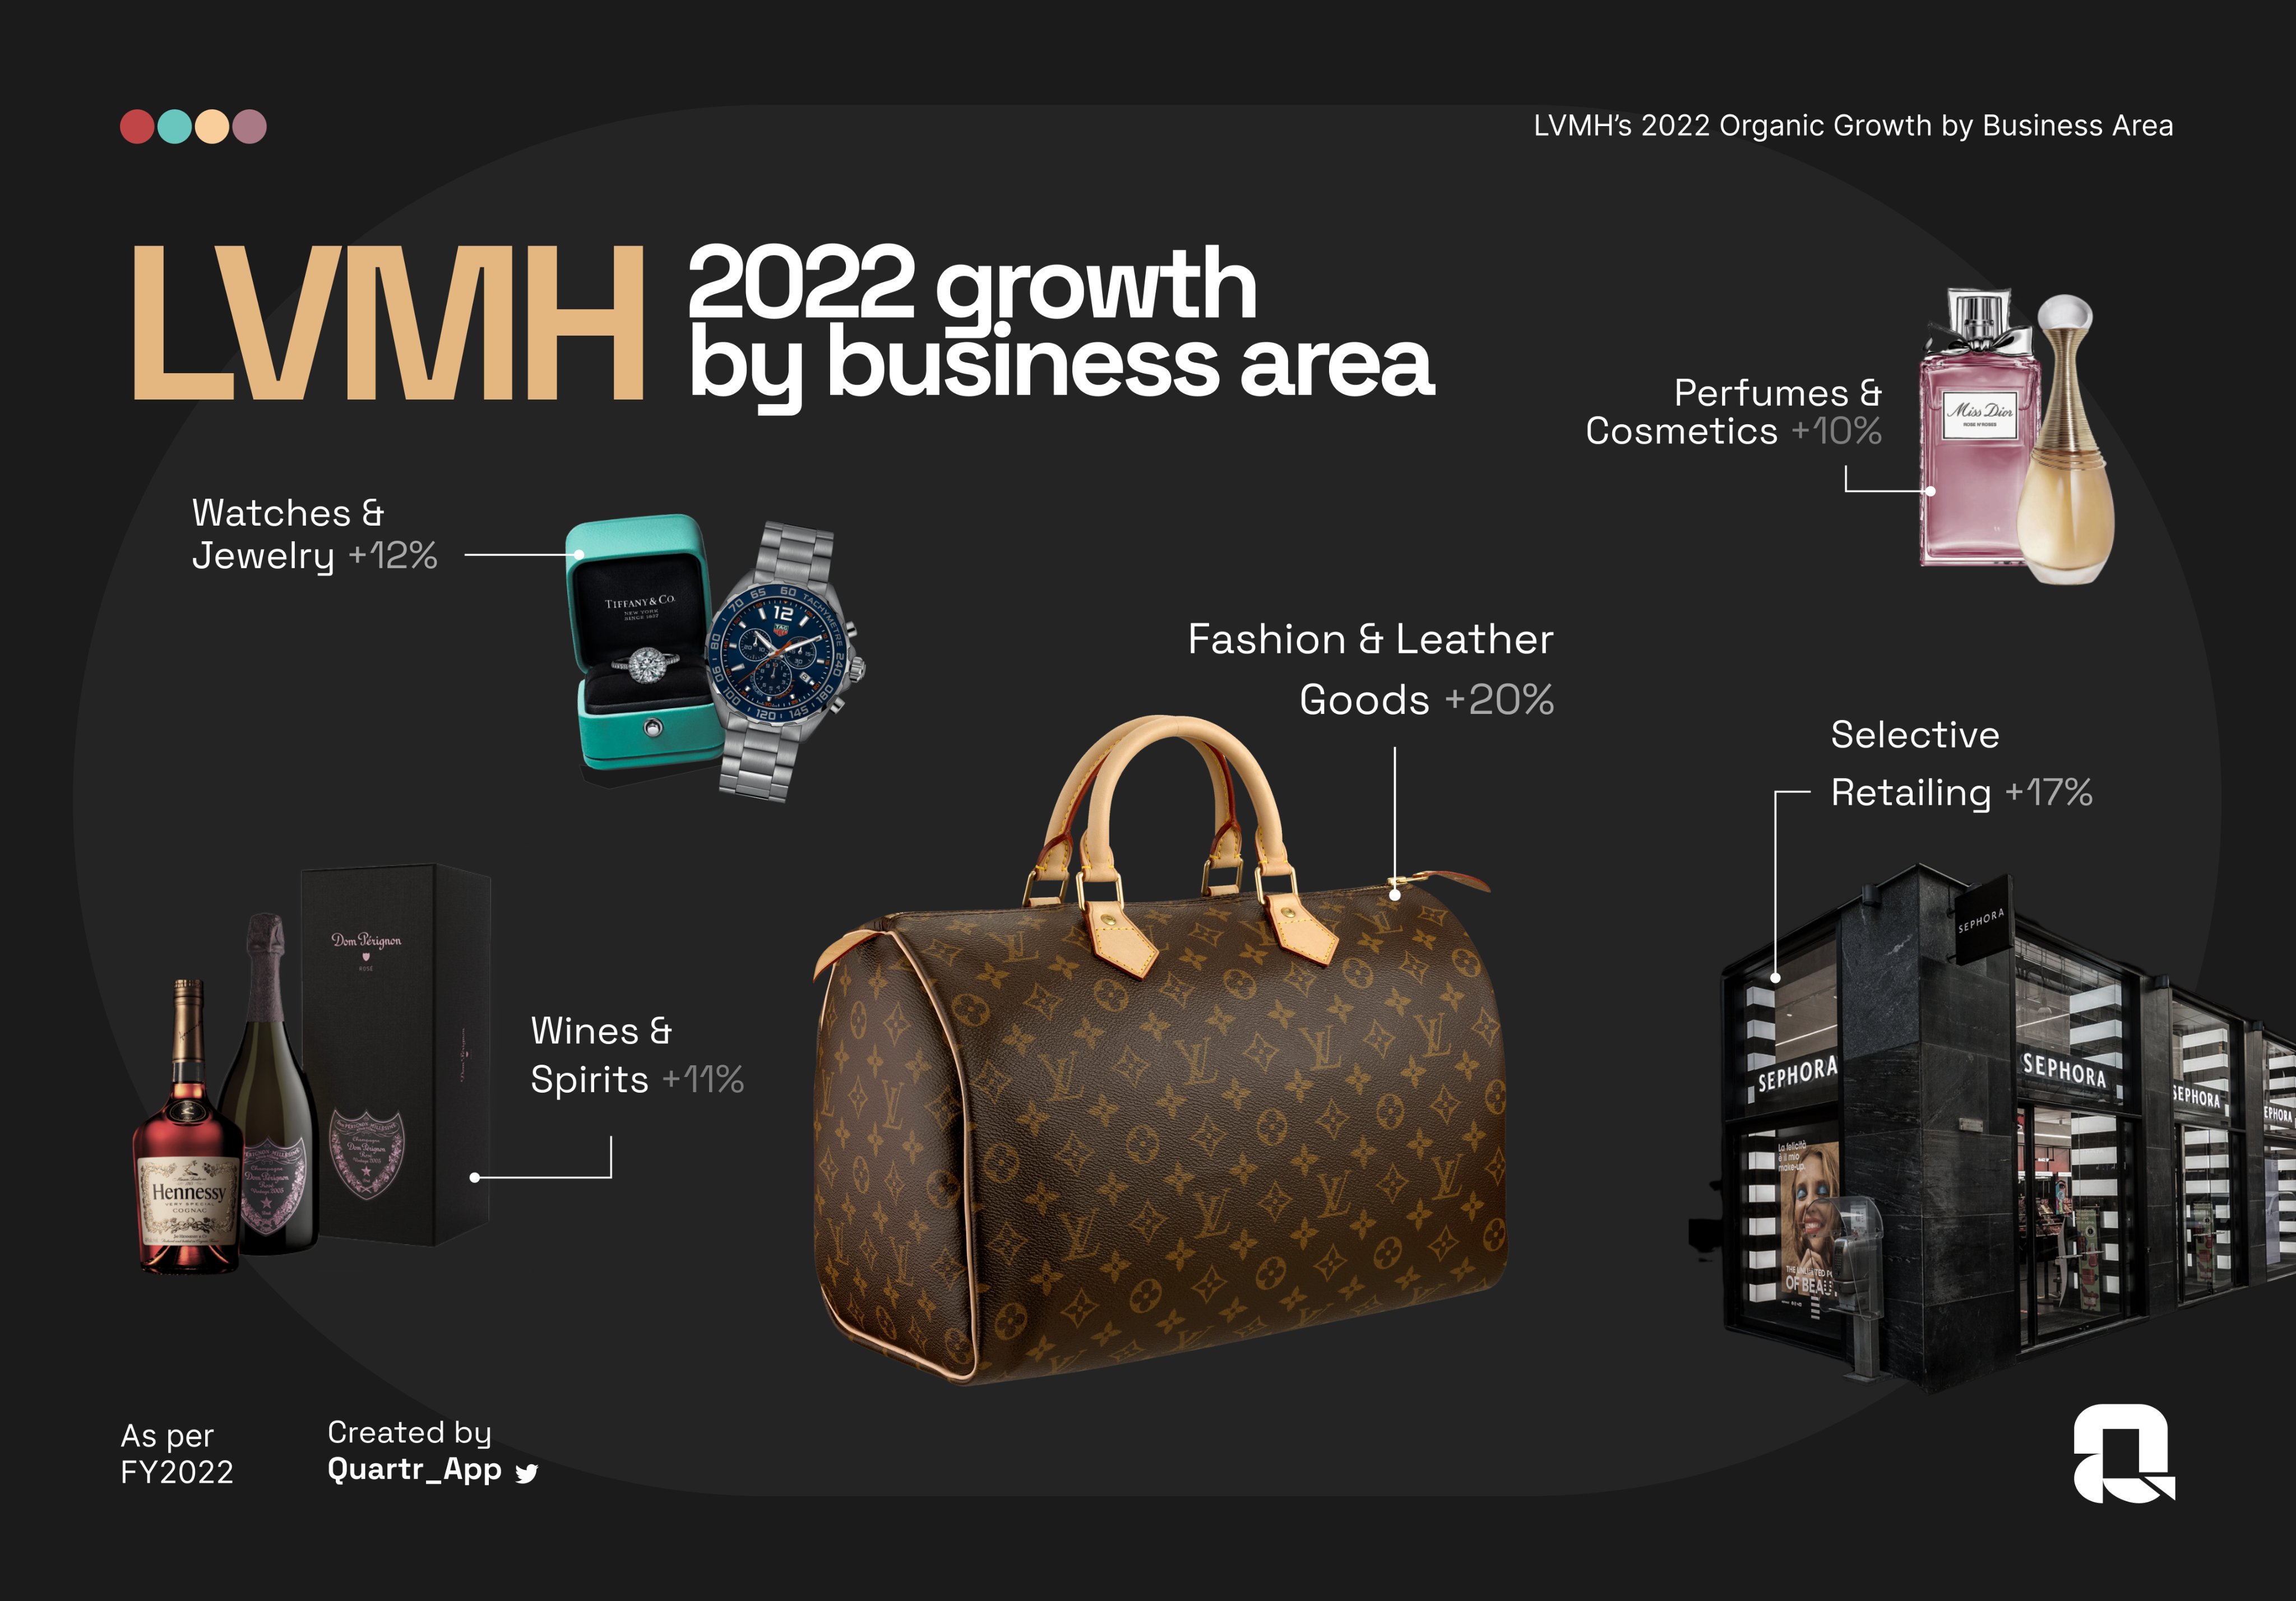 Quartr on X: $LVMH 2022 (organic growth): Louis Vuitton's revenue  surpassed €20B for the first time Revenue +17% *Wines & Spirits +11%  *Fashion & Leather Goods +20% *Perfumes & Cosmetics +10% *Watches